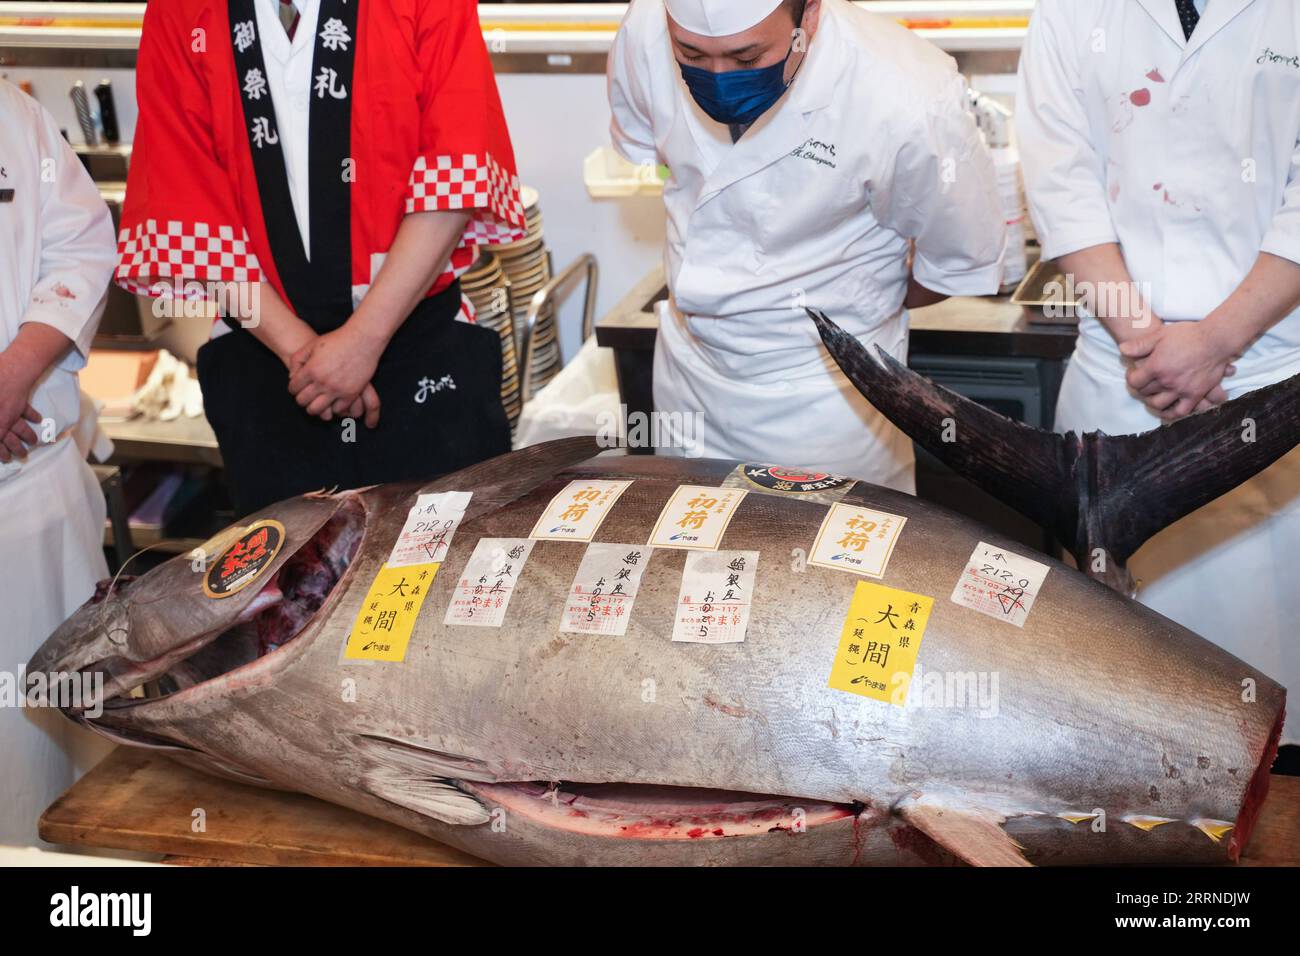 230105 -- TOKYO, Jan. 5, 2023 -- A chef looks at a bluefin tuna in a shop in Tokyo, Japan, Jan. 5, 2023. A 212-kilogram bluefin tuna caught off the northern Japan town of Oma, Aomori Prefecture, fetched 36.04 million yen about 271,500 U.S. dollars in the first auction of 2023 at Toyosu market early on Thursday.  JAPAN-TOKYO-BLUEFIN TUNA-AUCTION ZhangxXiaoyu PUBLICATIONxNOTxINxCHN Stock Photo